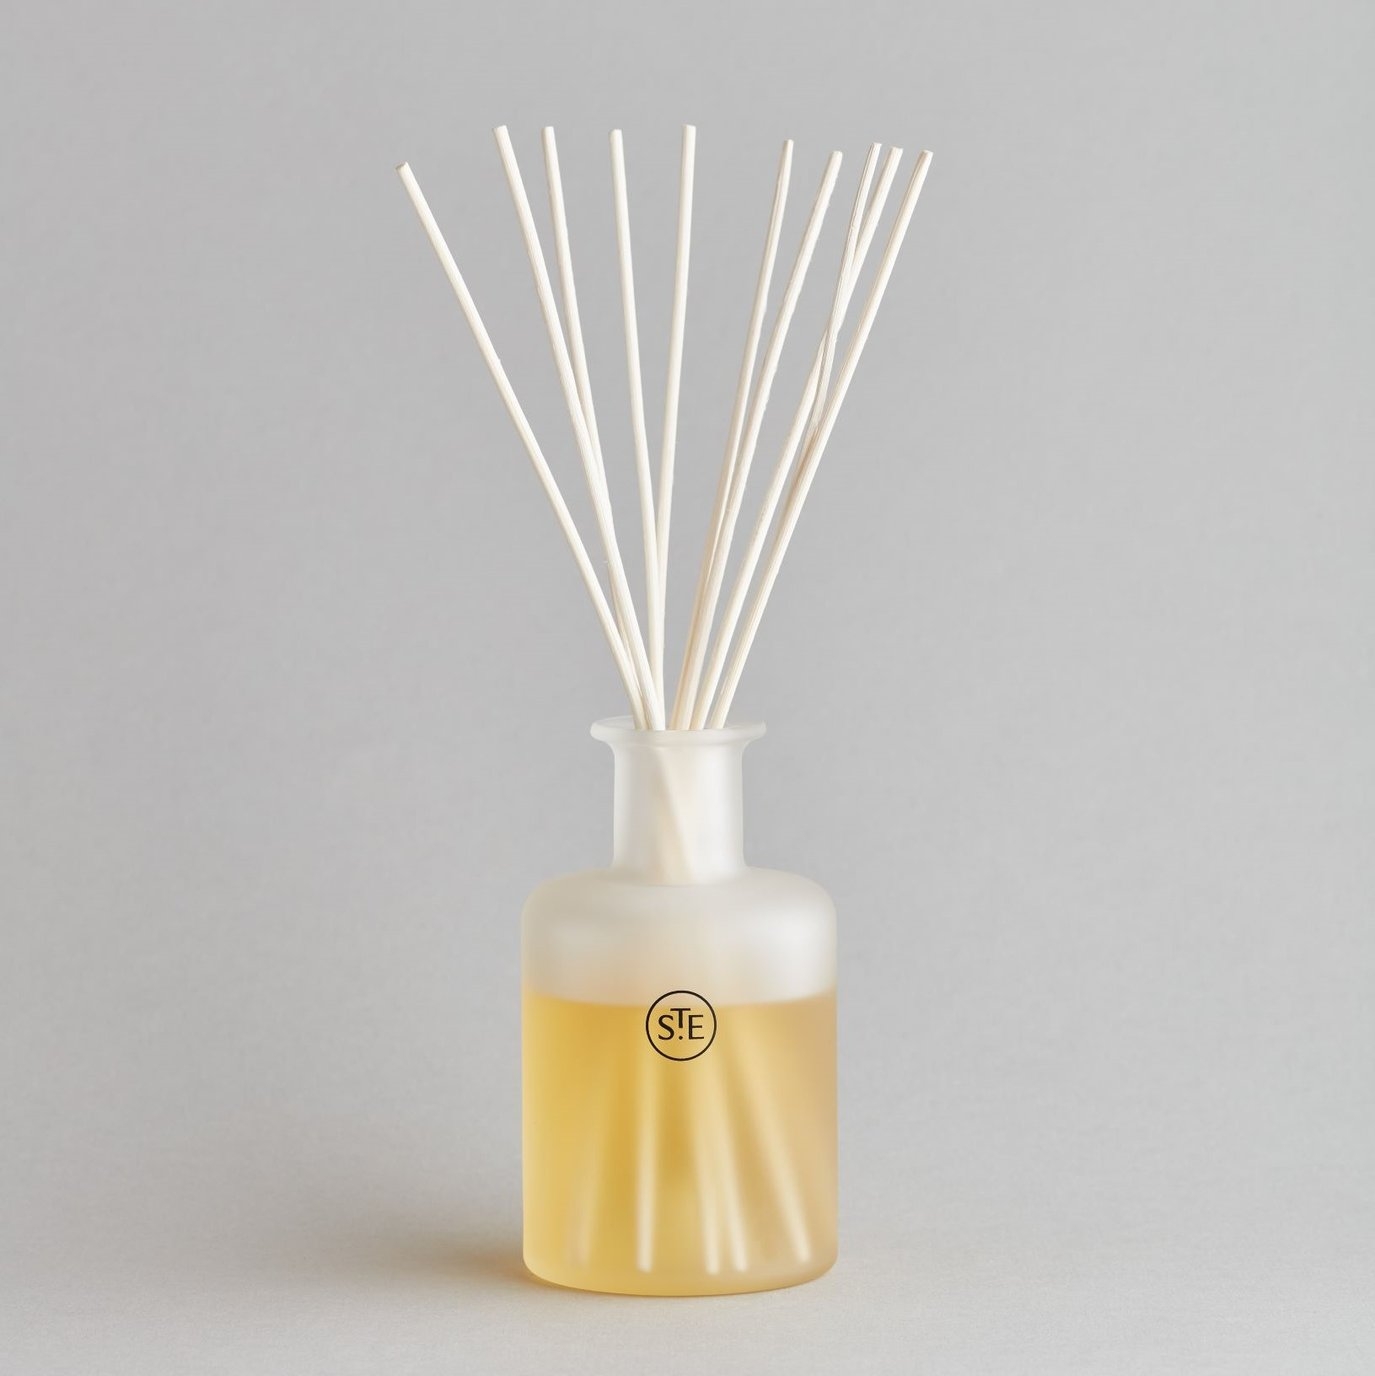 Reeds | St. Eval – St. Eval Candle Company